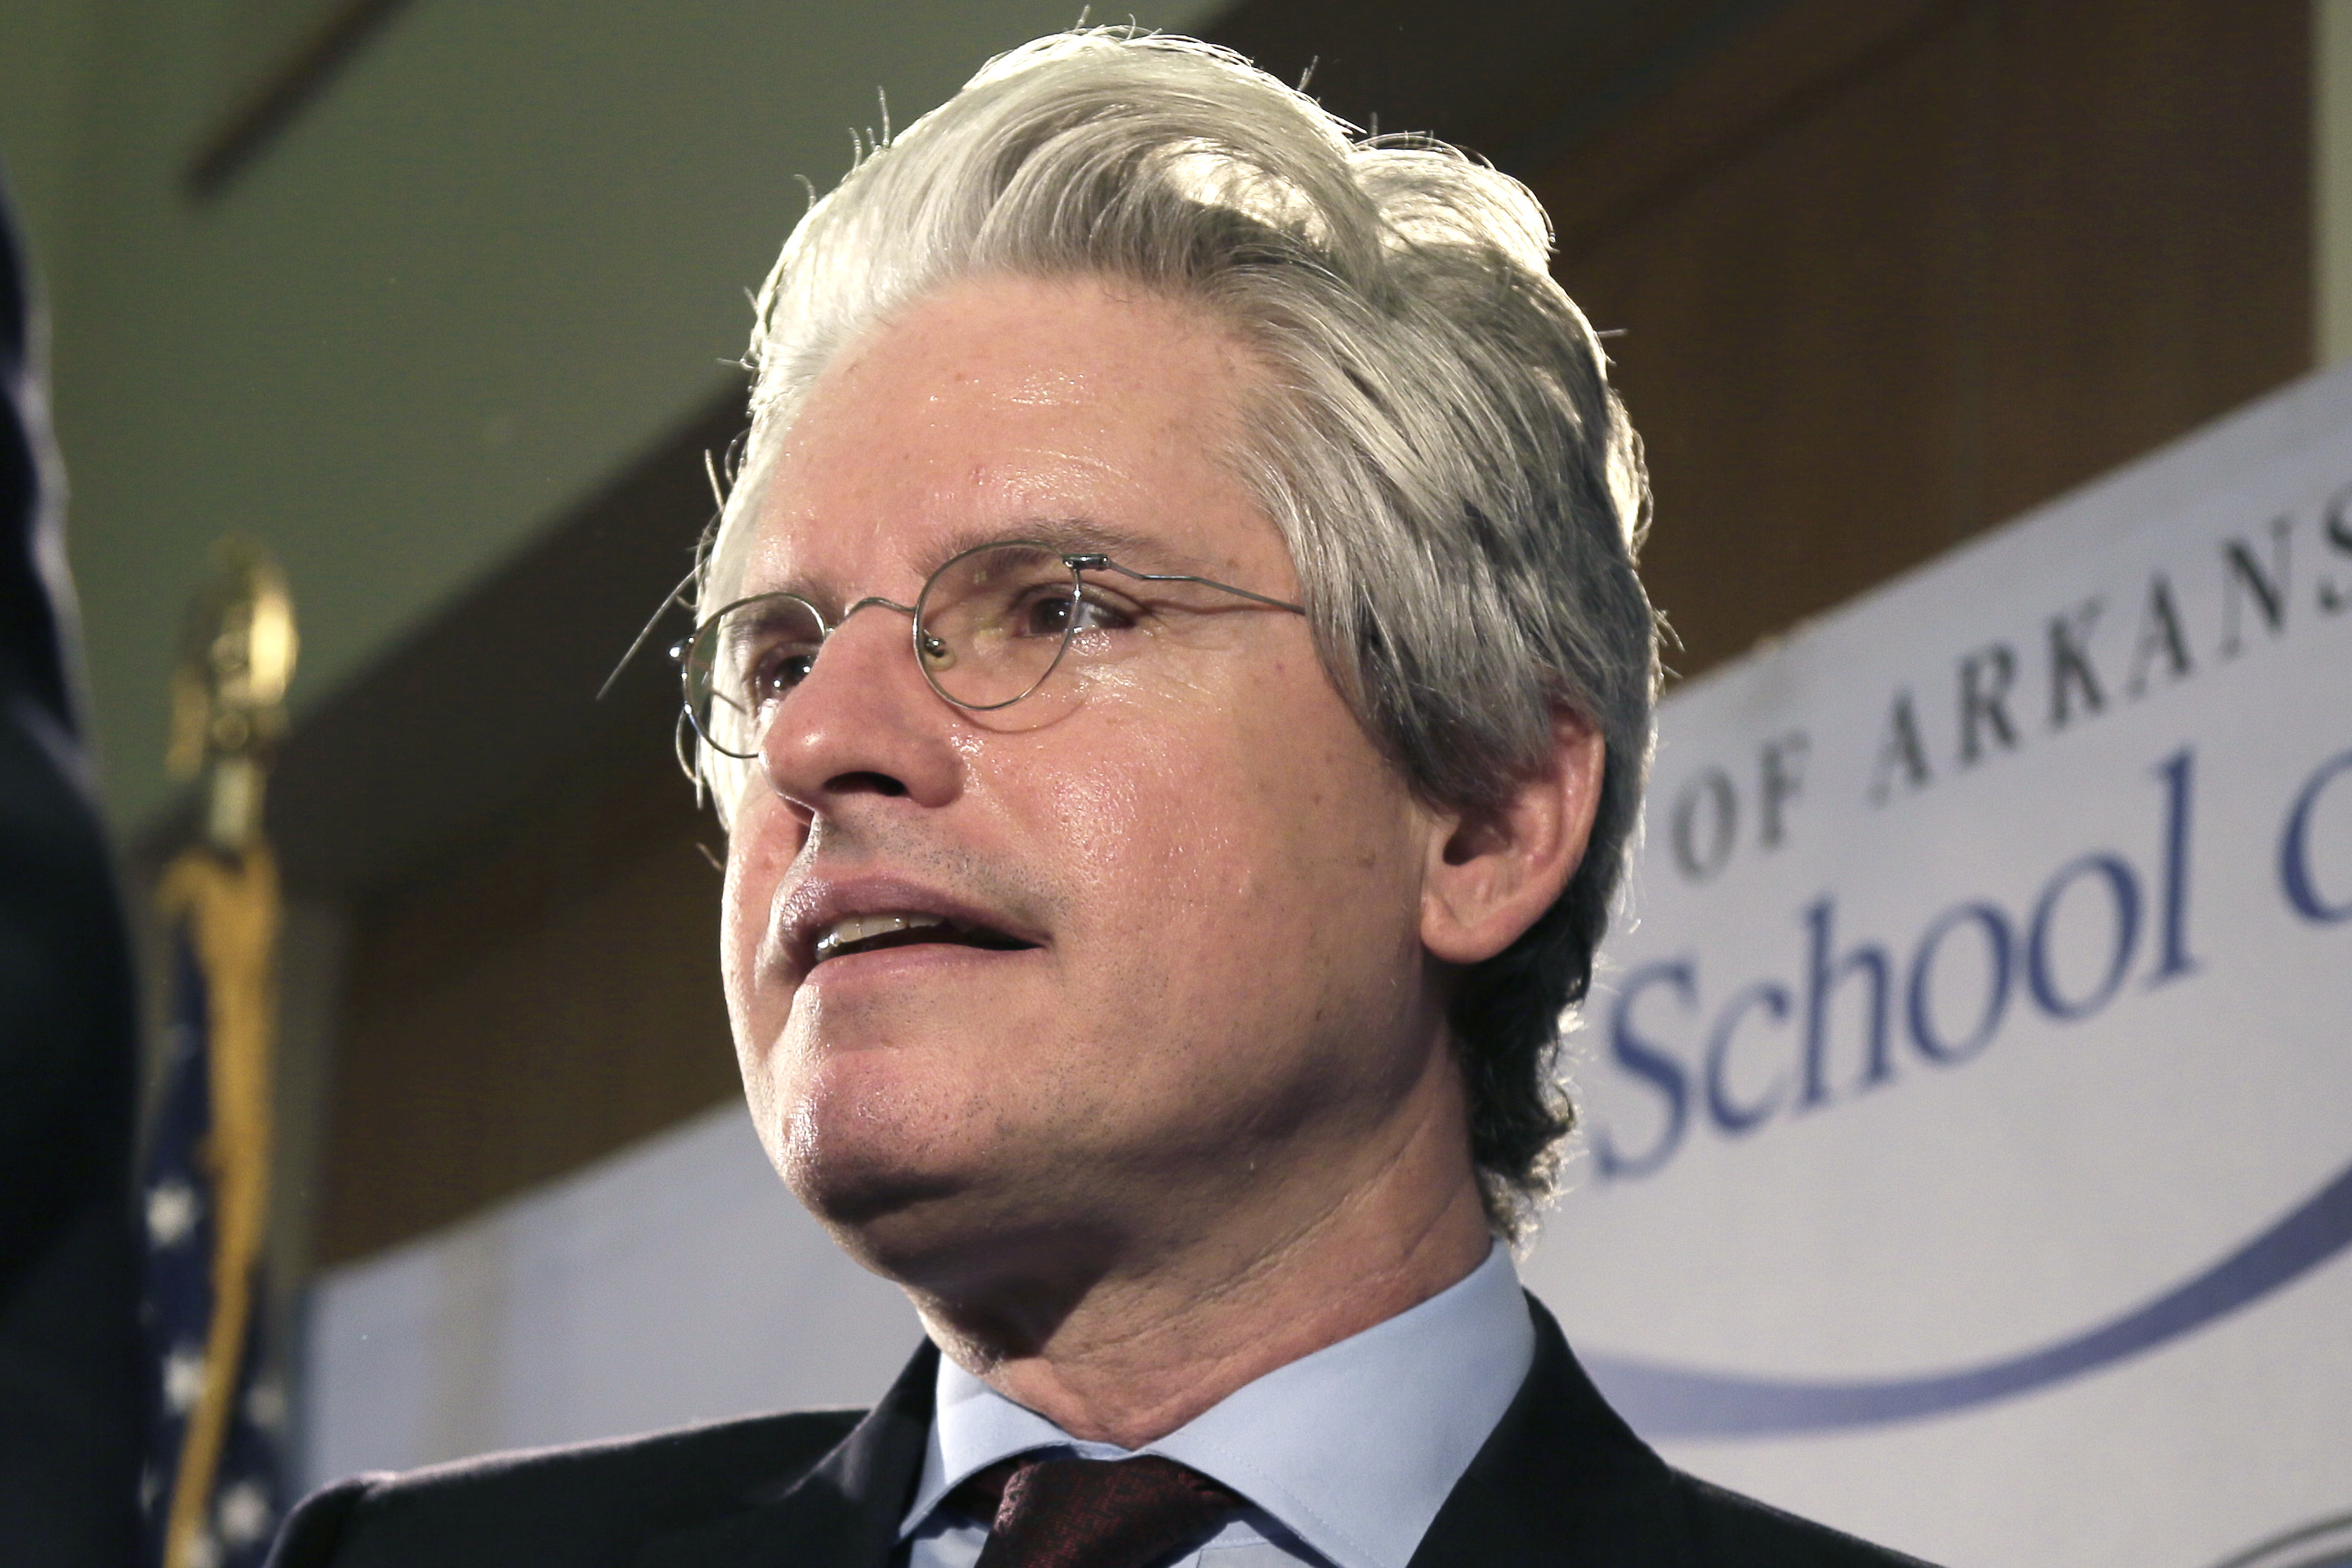 David Brock, founder of Correct the Record, speaks at the Clinton School of Public Service. (Danny Johnston—AP)